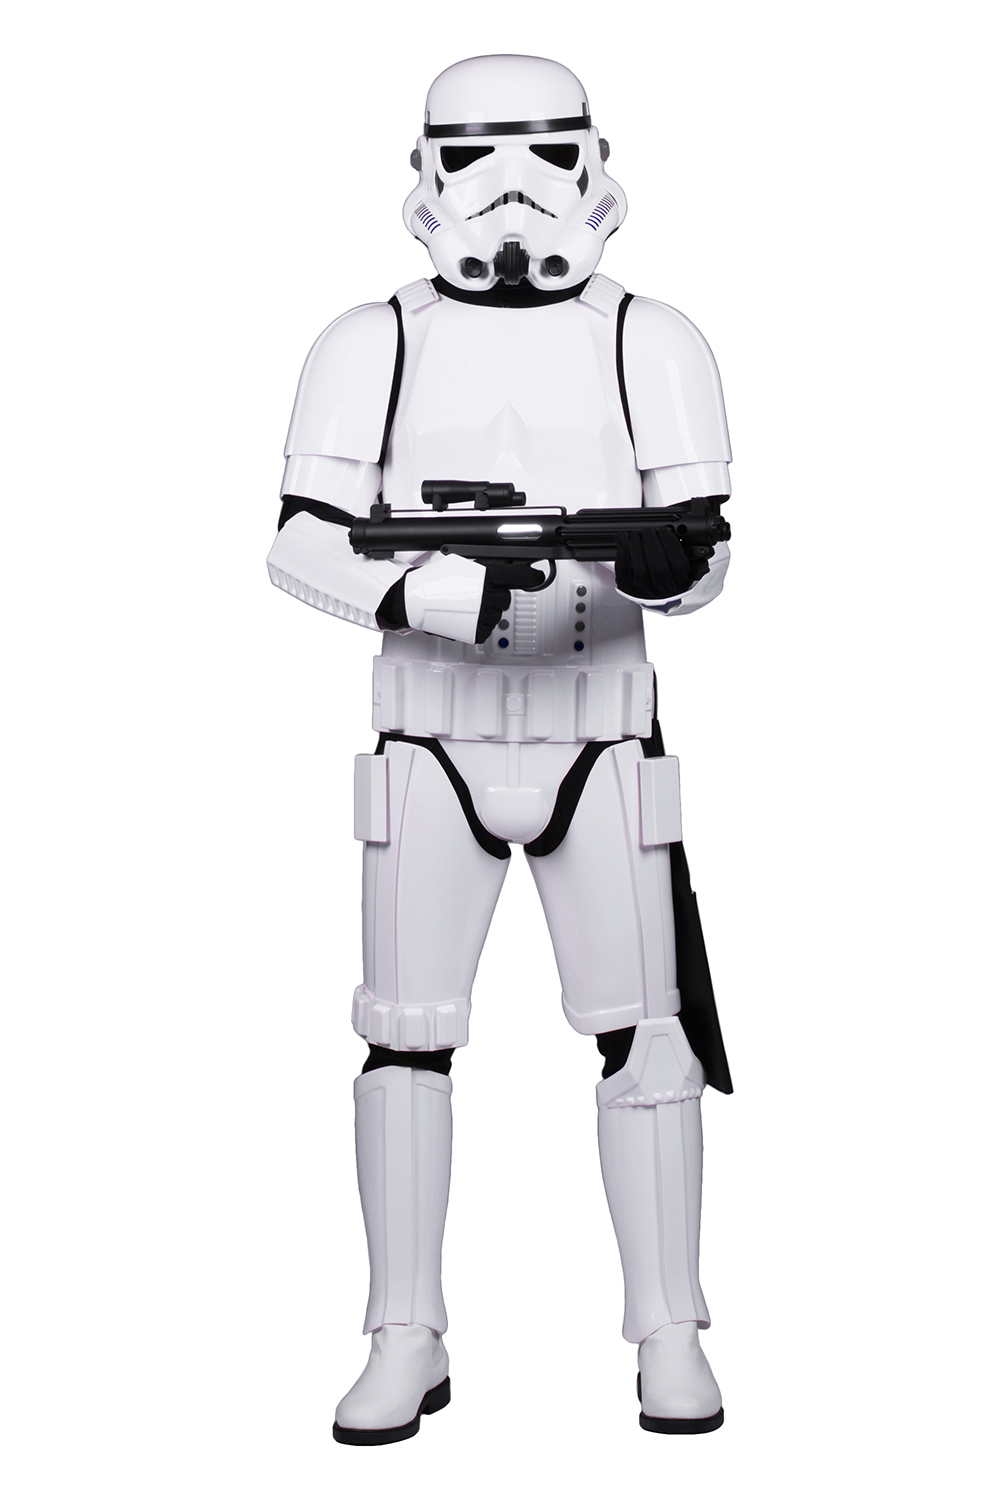 Stormtrooper Costume Armour Packages available at www.StormtrooperStore.com - The Stormtrooper Store